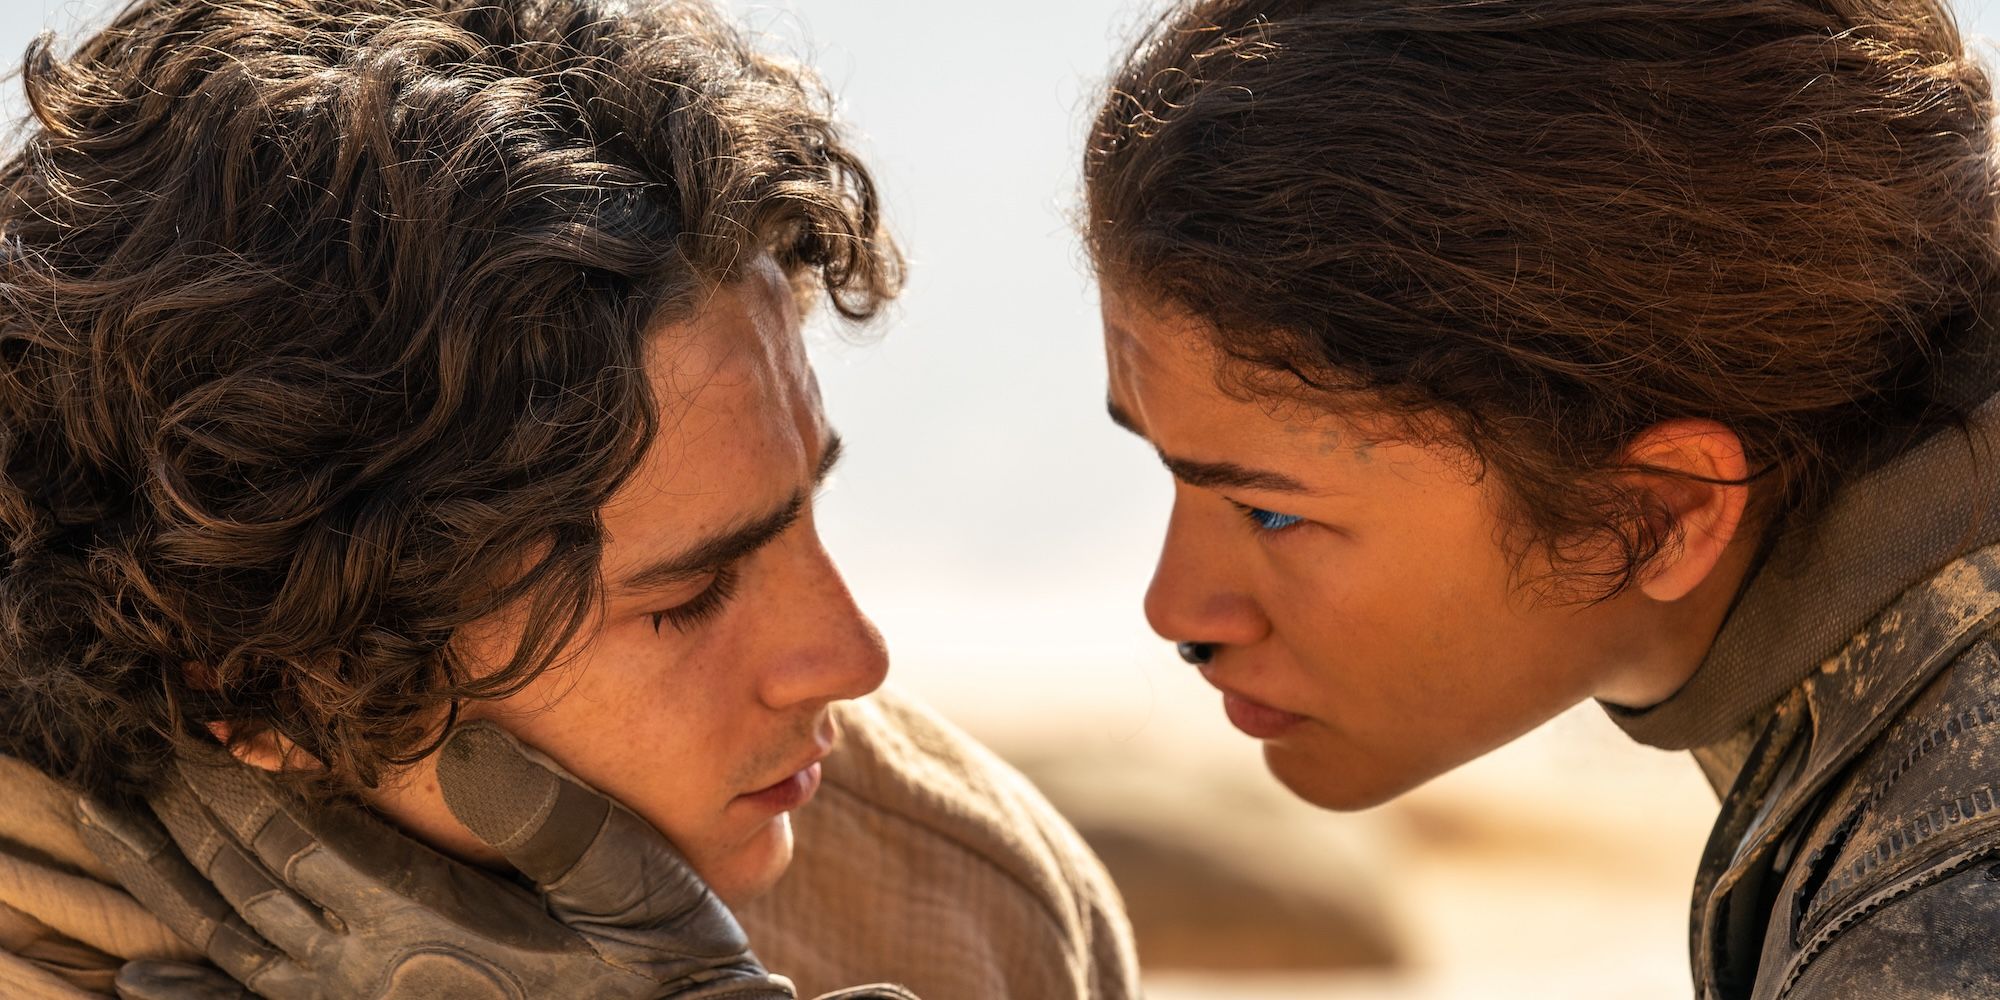 Chani, played by Zendaya, grips Paul's face as they look at each other while in the Arrakis desert in Dune: Part Two.